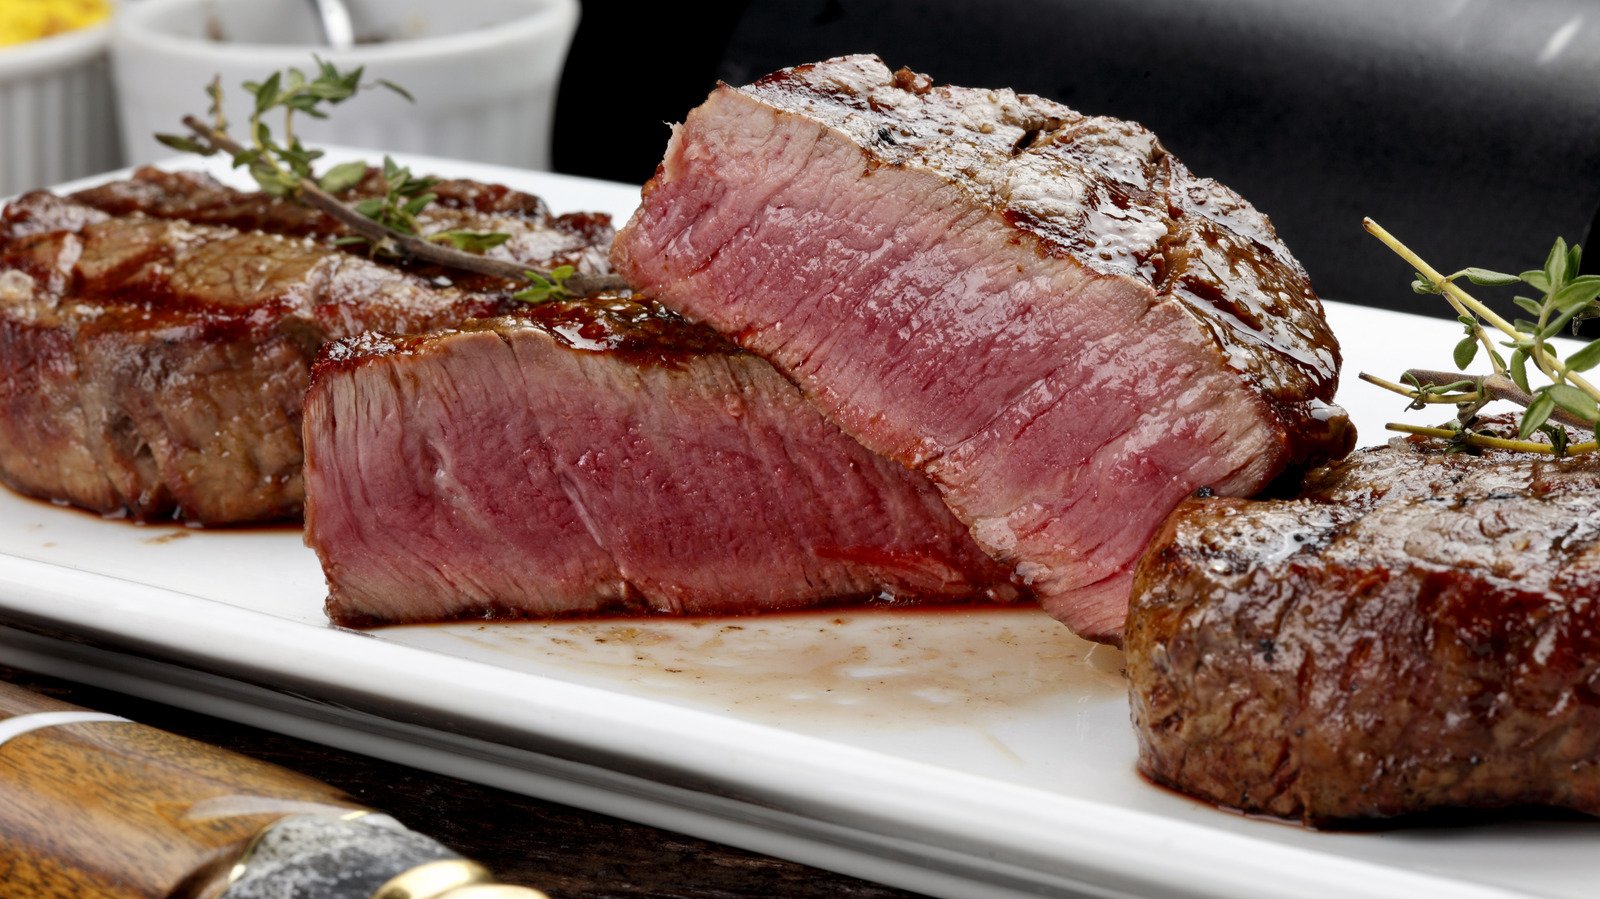 Ruth's Chris Vs. Morton's: Which Is Better?